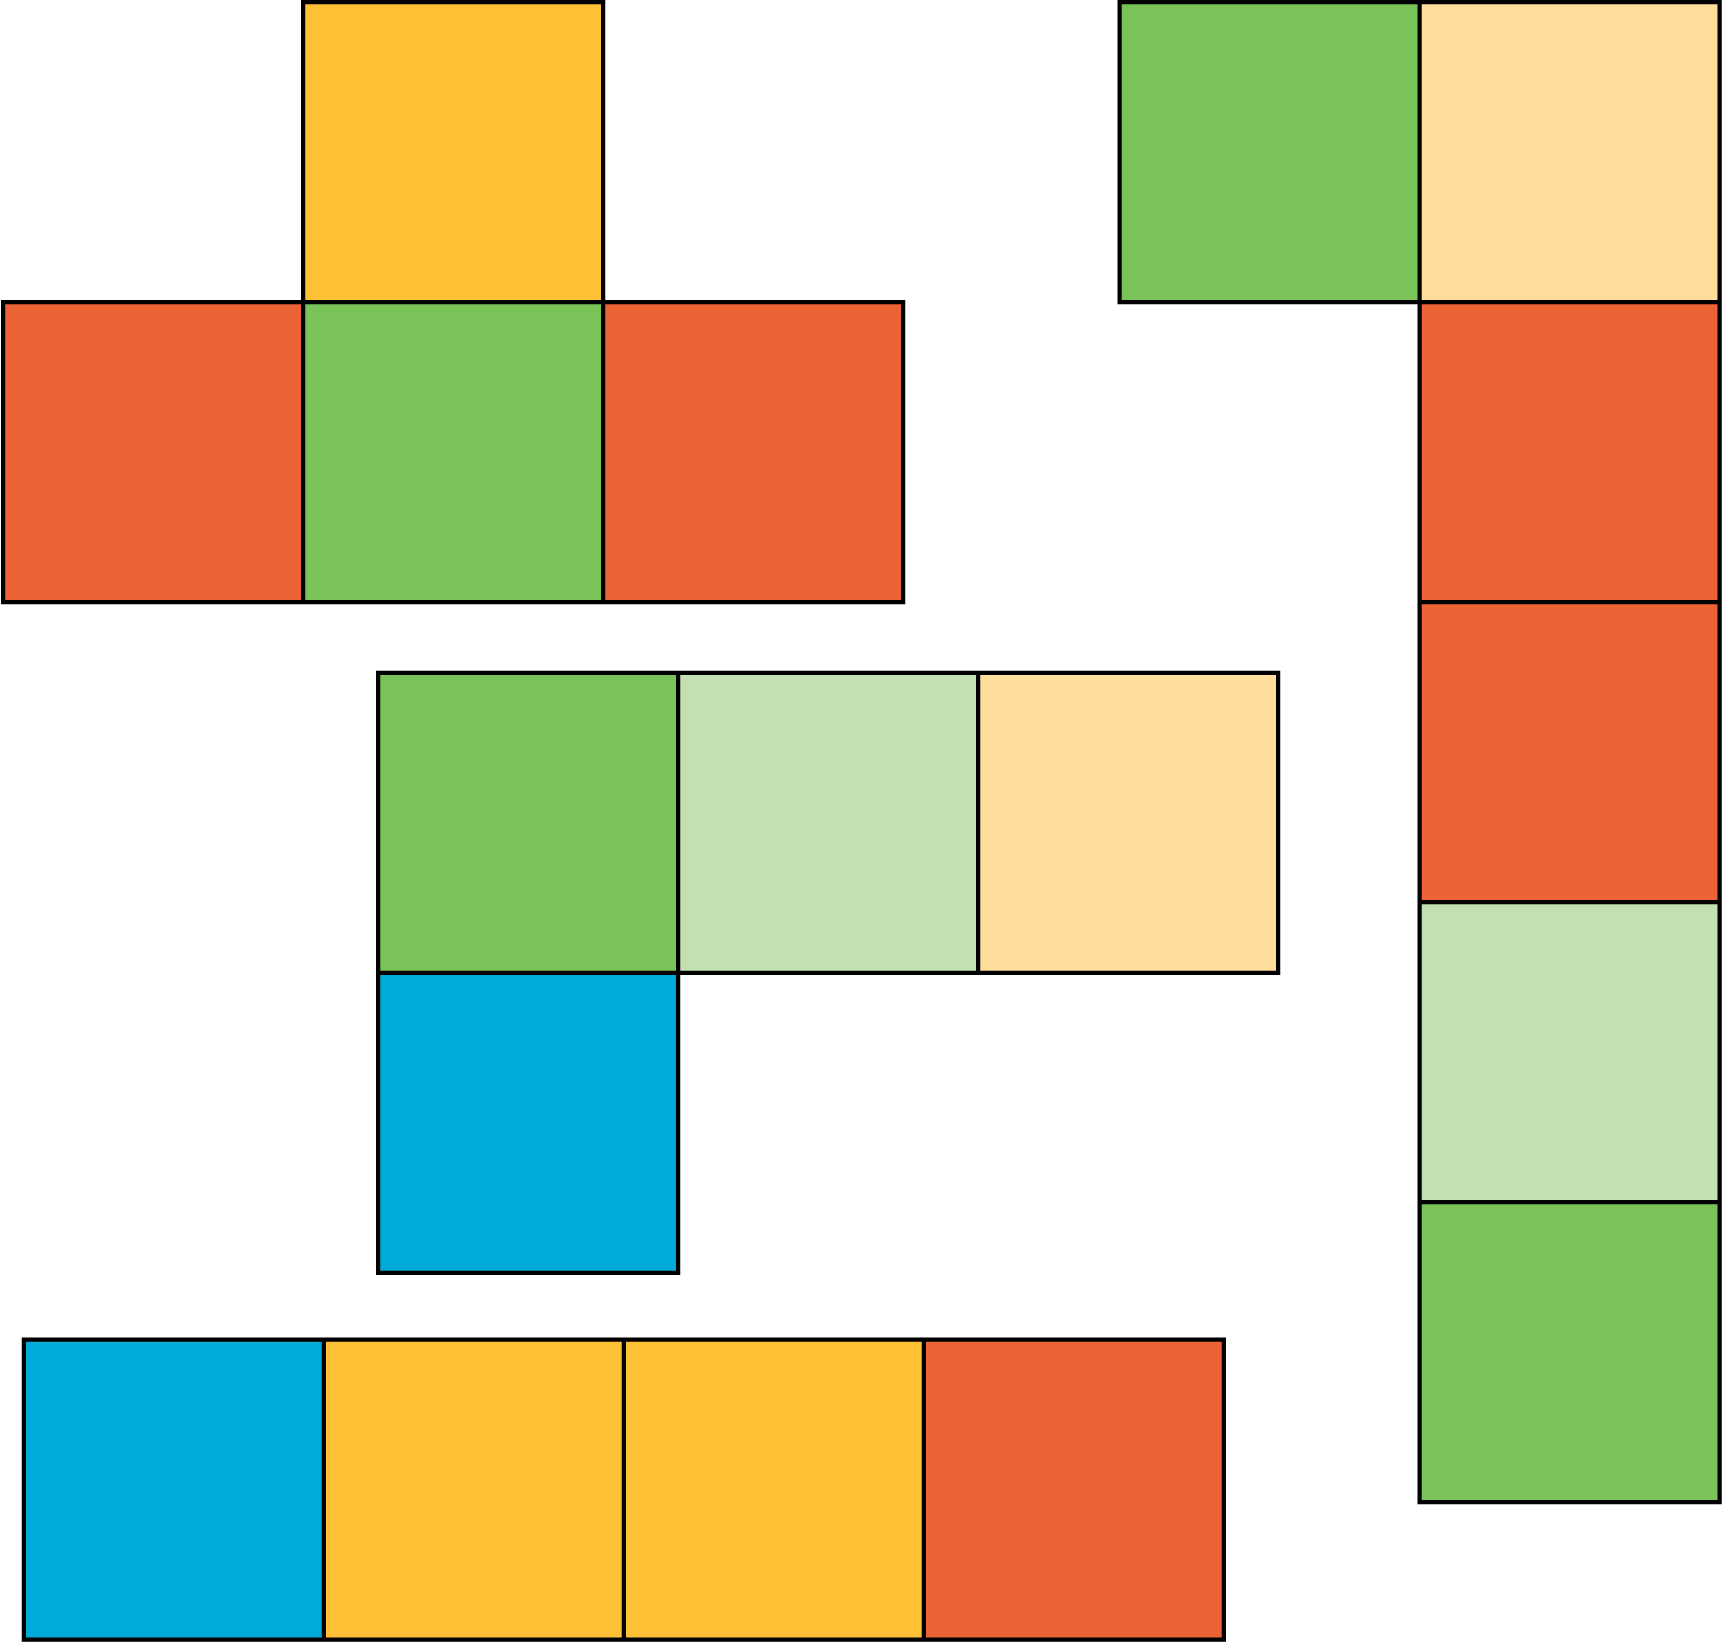 Groups of square tiles.